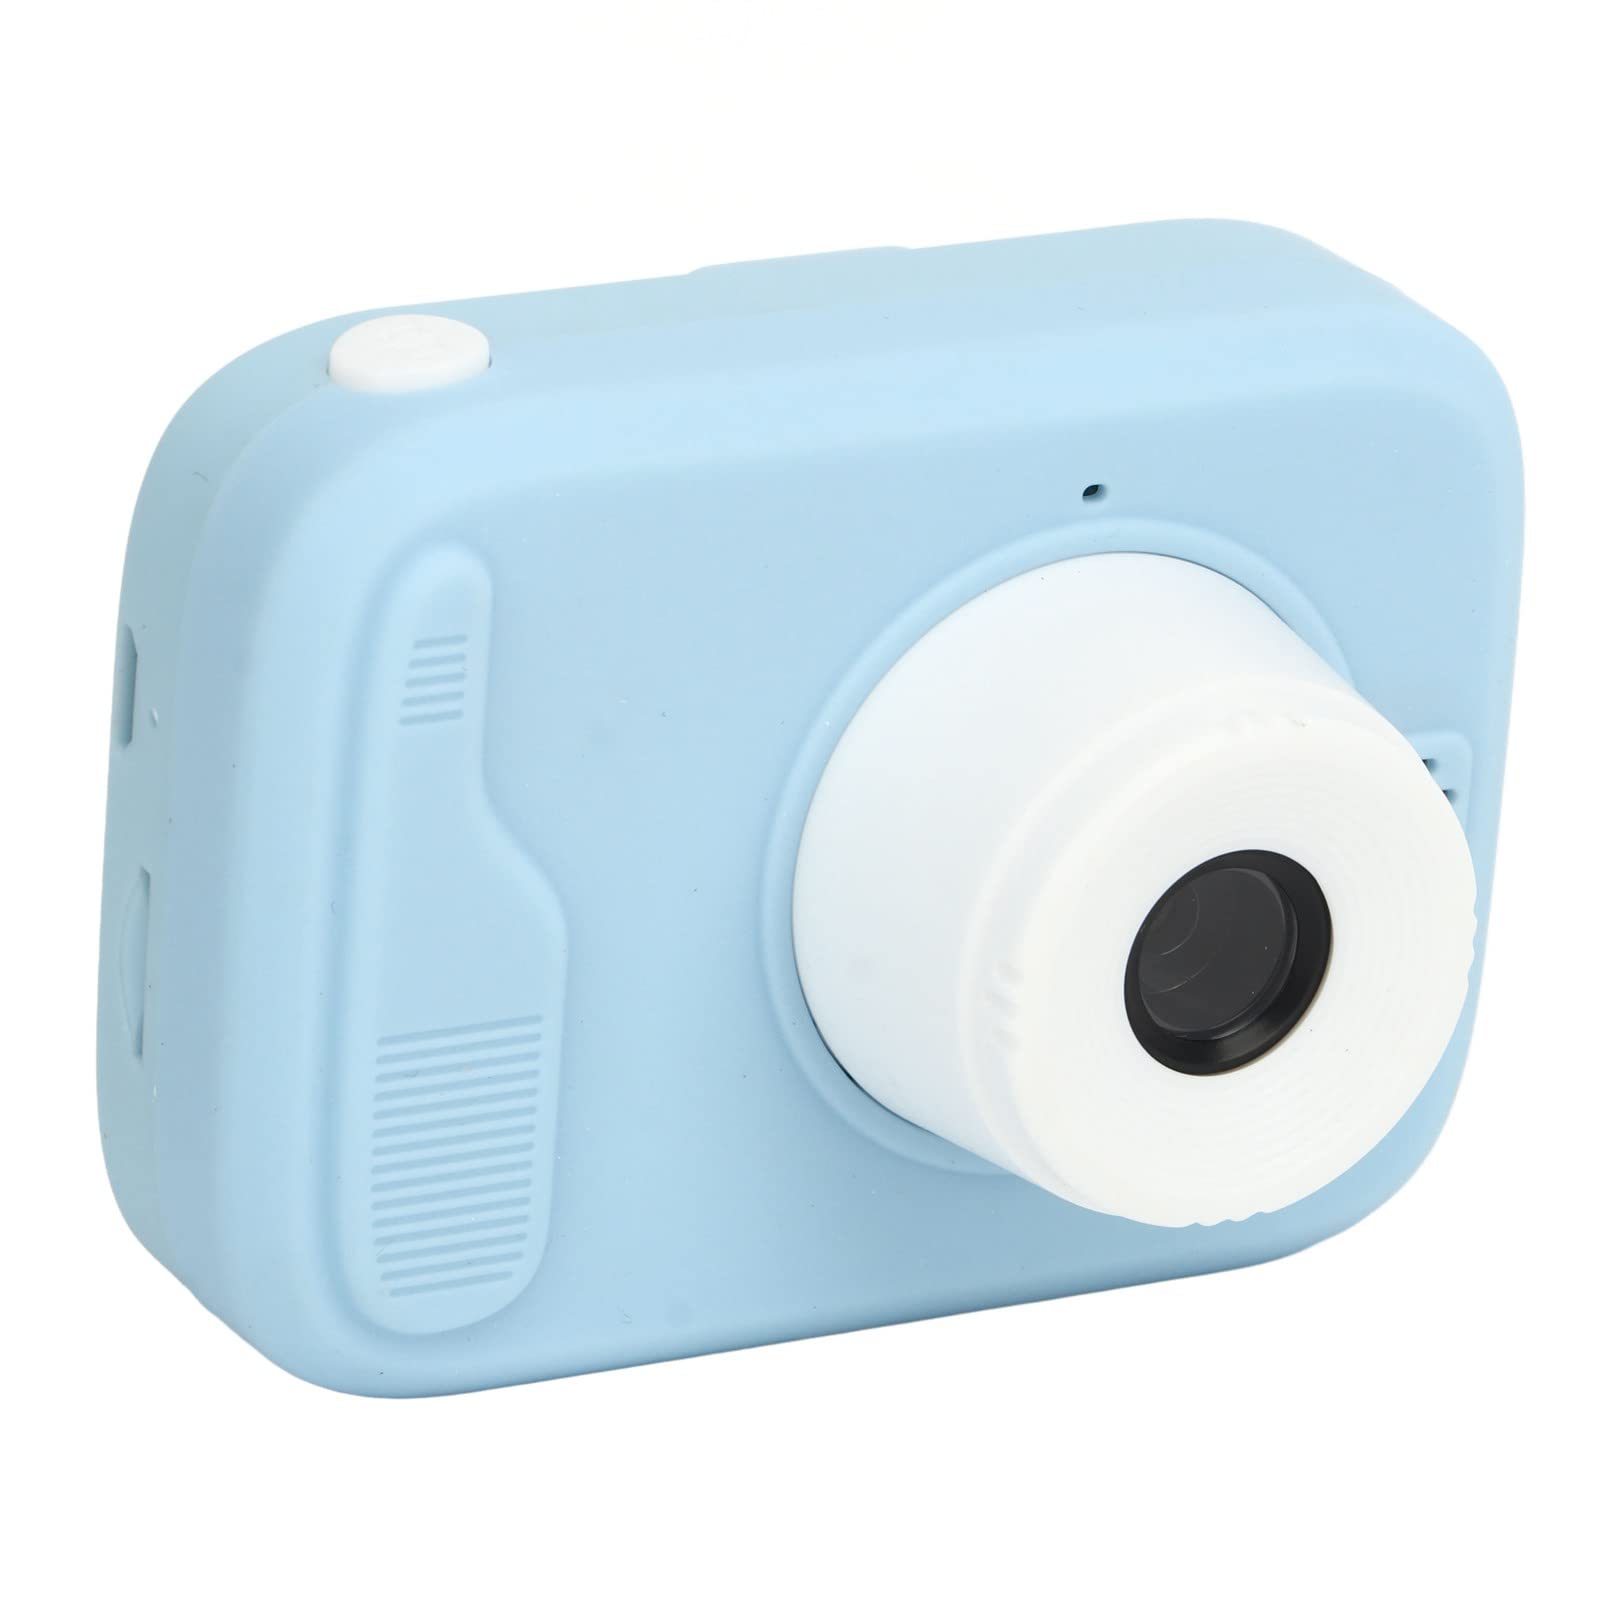 Kids Camera, 20MP Dual Front Rear Cameras Children Camera Various Filter Functions Portable with Flash Light for Outdoor (Blue)